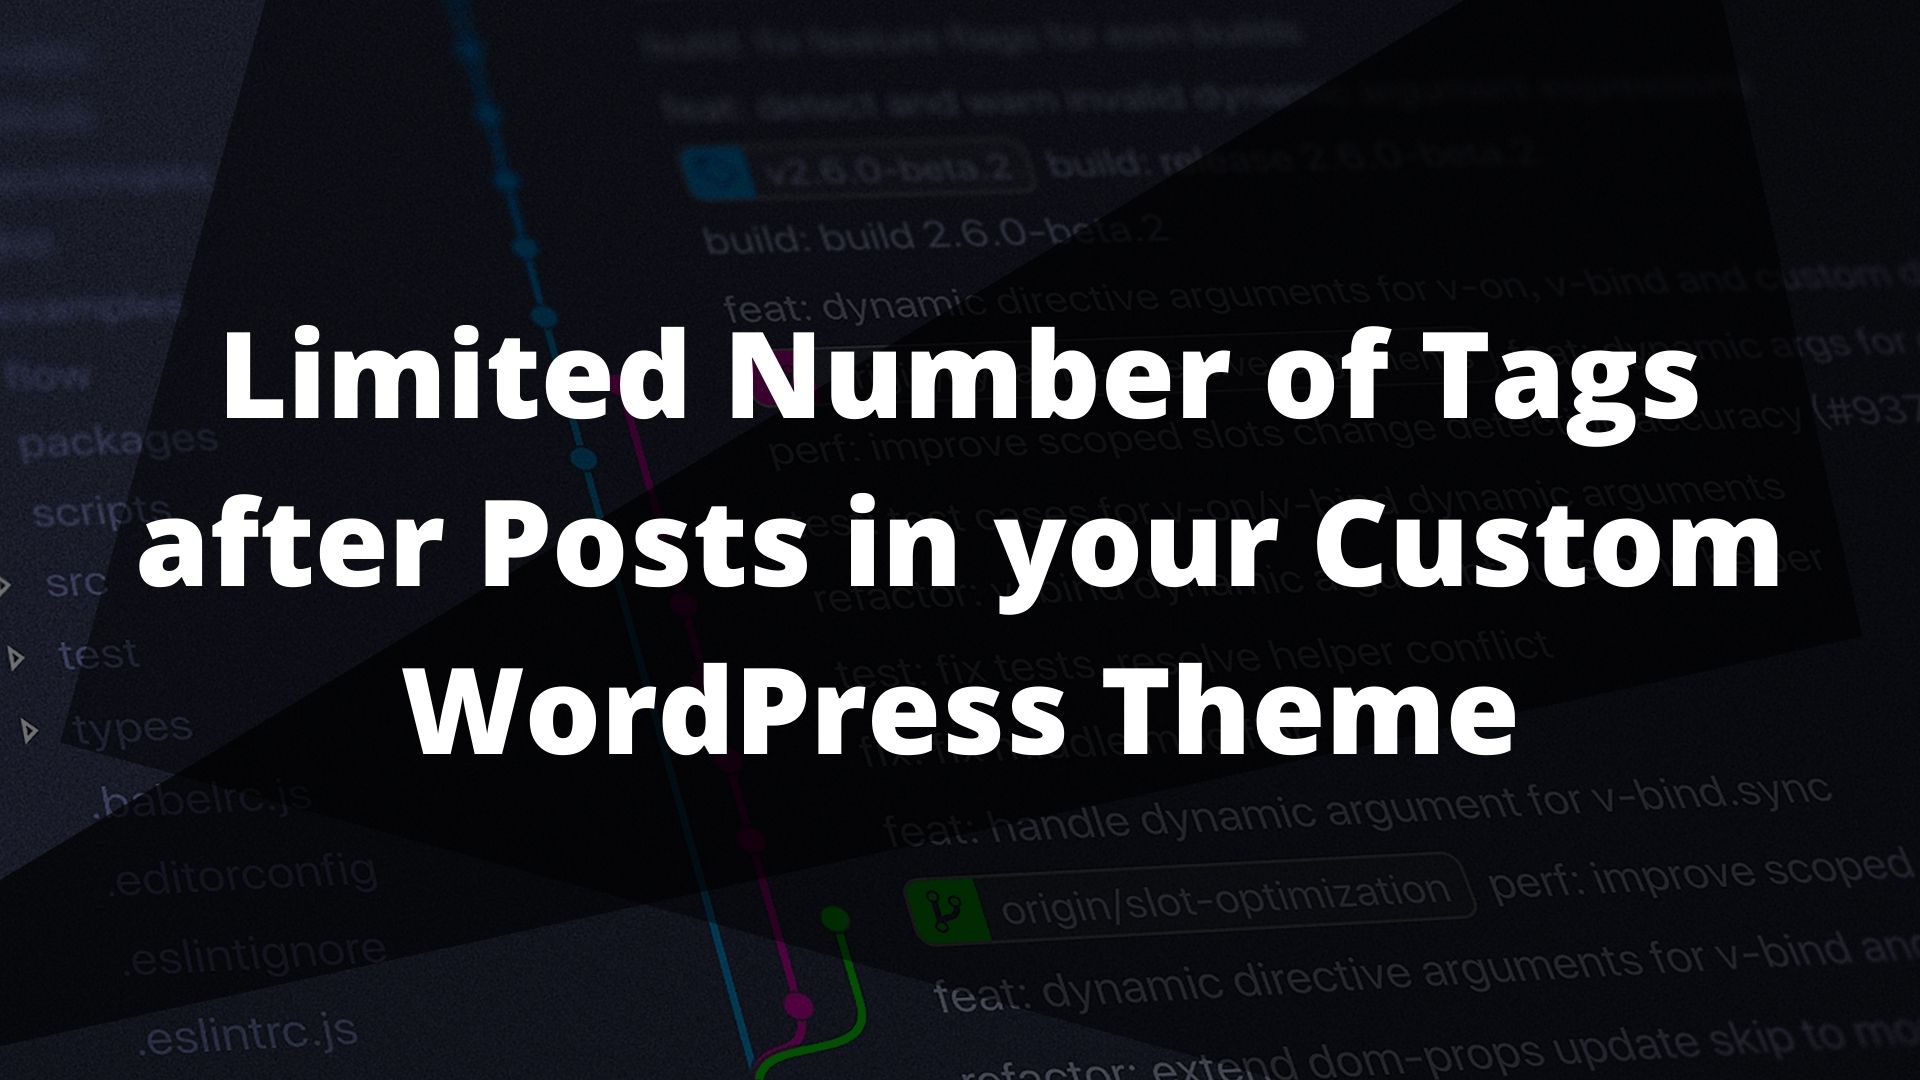 limit the number of tags after posts in your custom wordpress theme 1